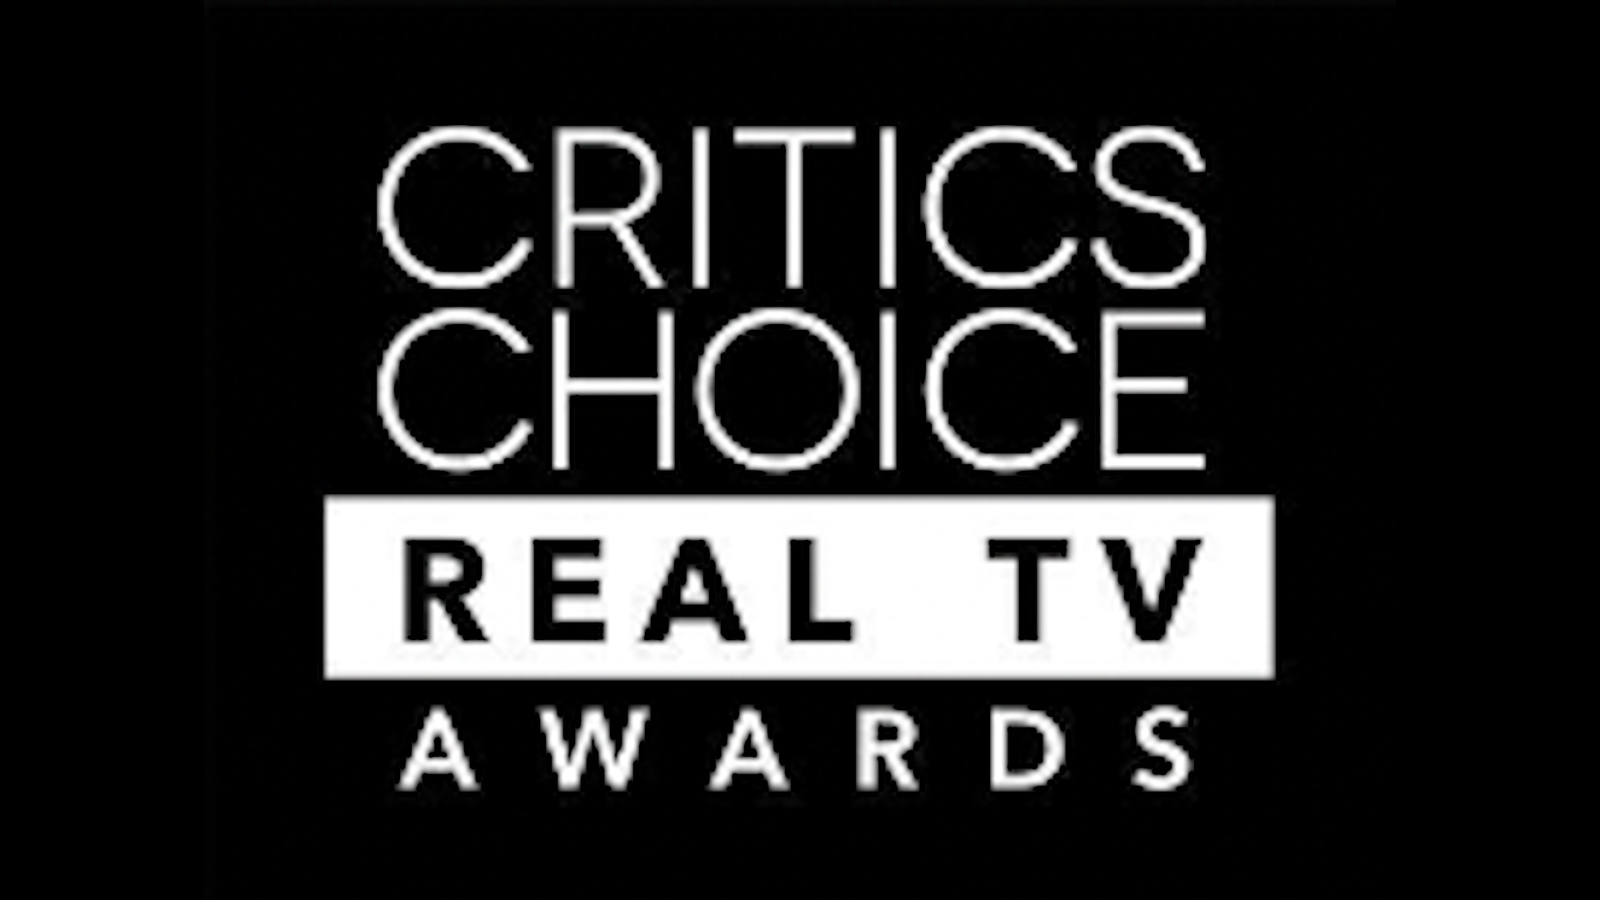 ‘The Golden Bachelor,’ ‘Shark Tank’ and more nominated for Critics Choice Real TV Awards [Video]